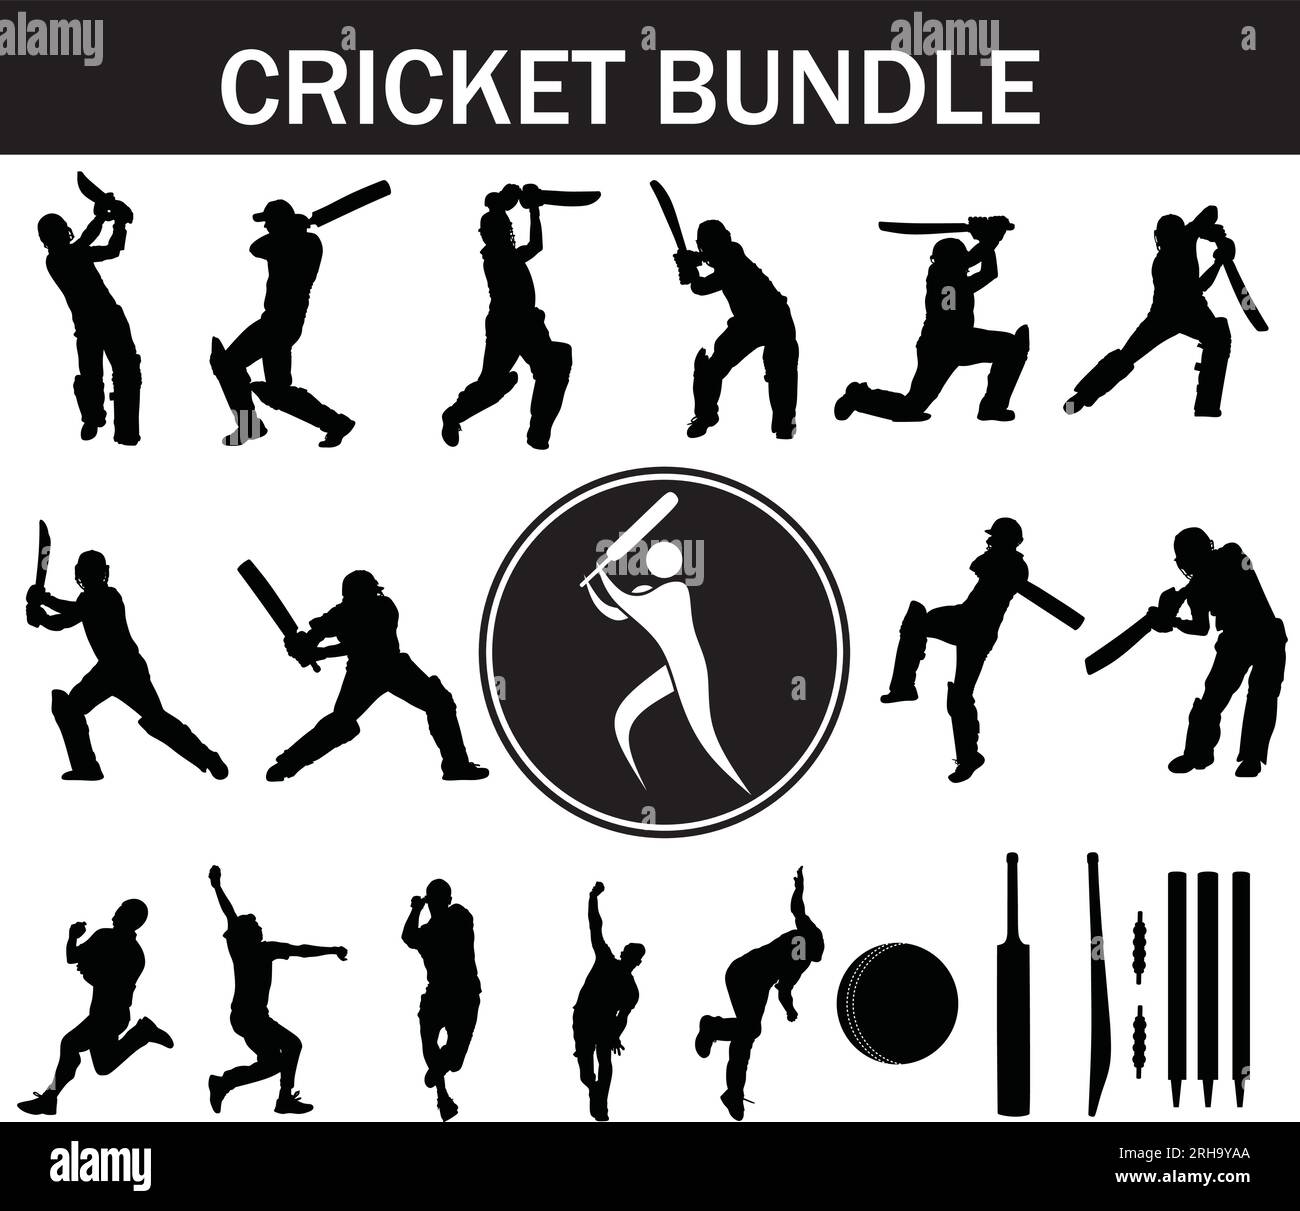 Cricket Silhouette Bundle | Collection of Cricket Players with Logo and Cricket Equipment Stock Vector